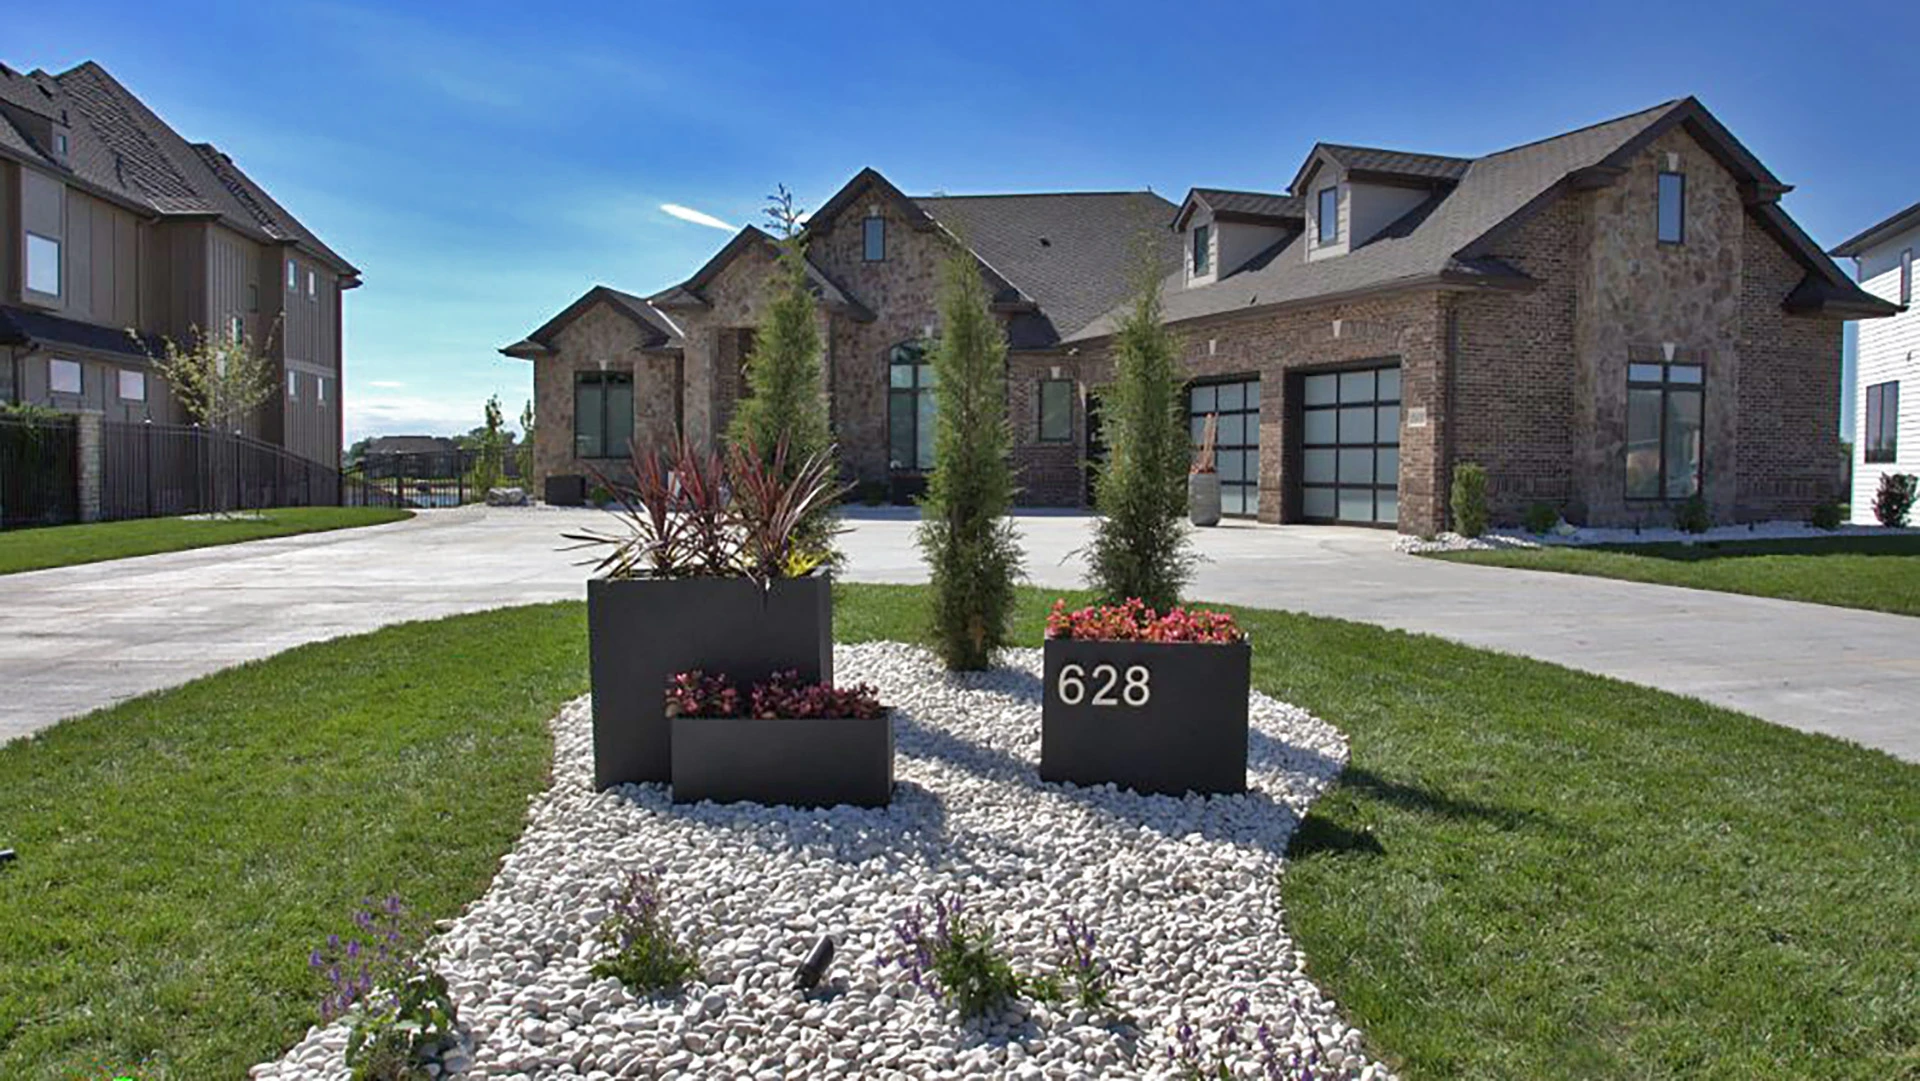 A custom landscape design in front of a home in Omaha, NE.